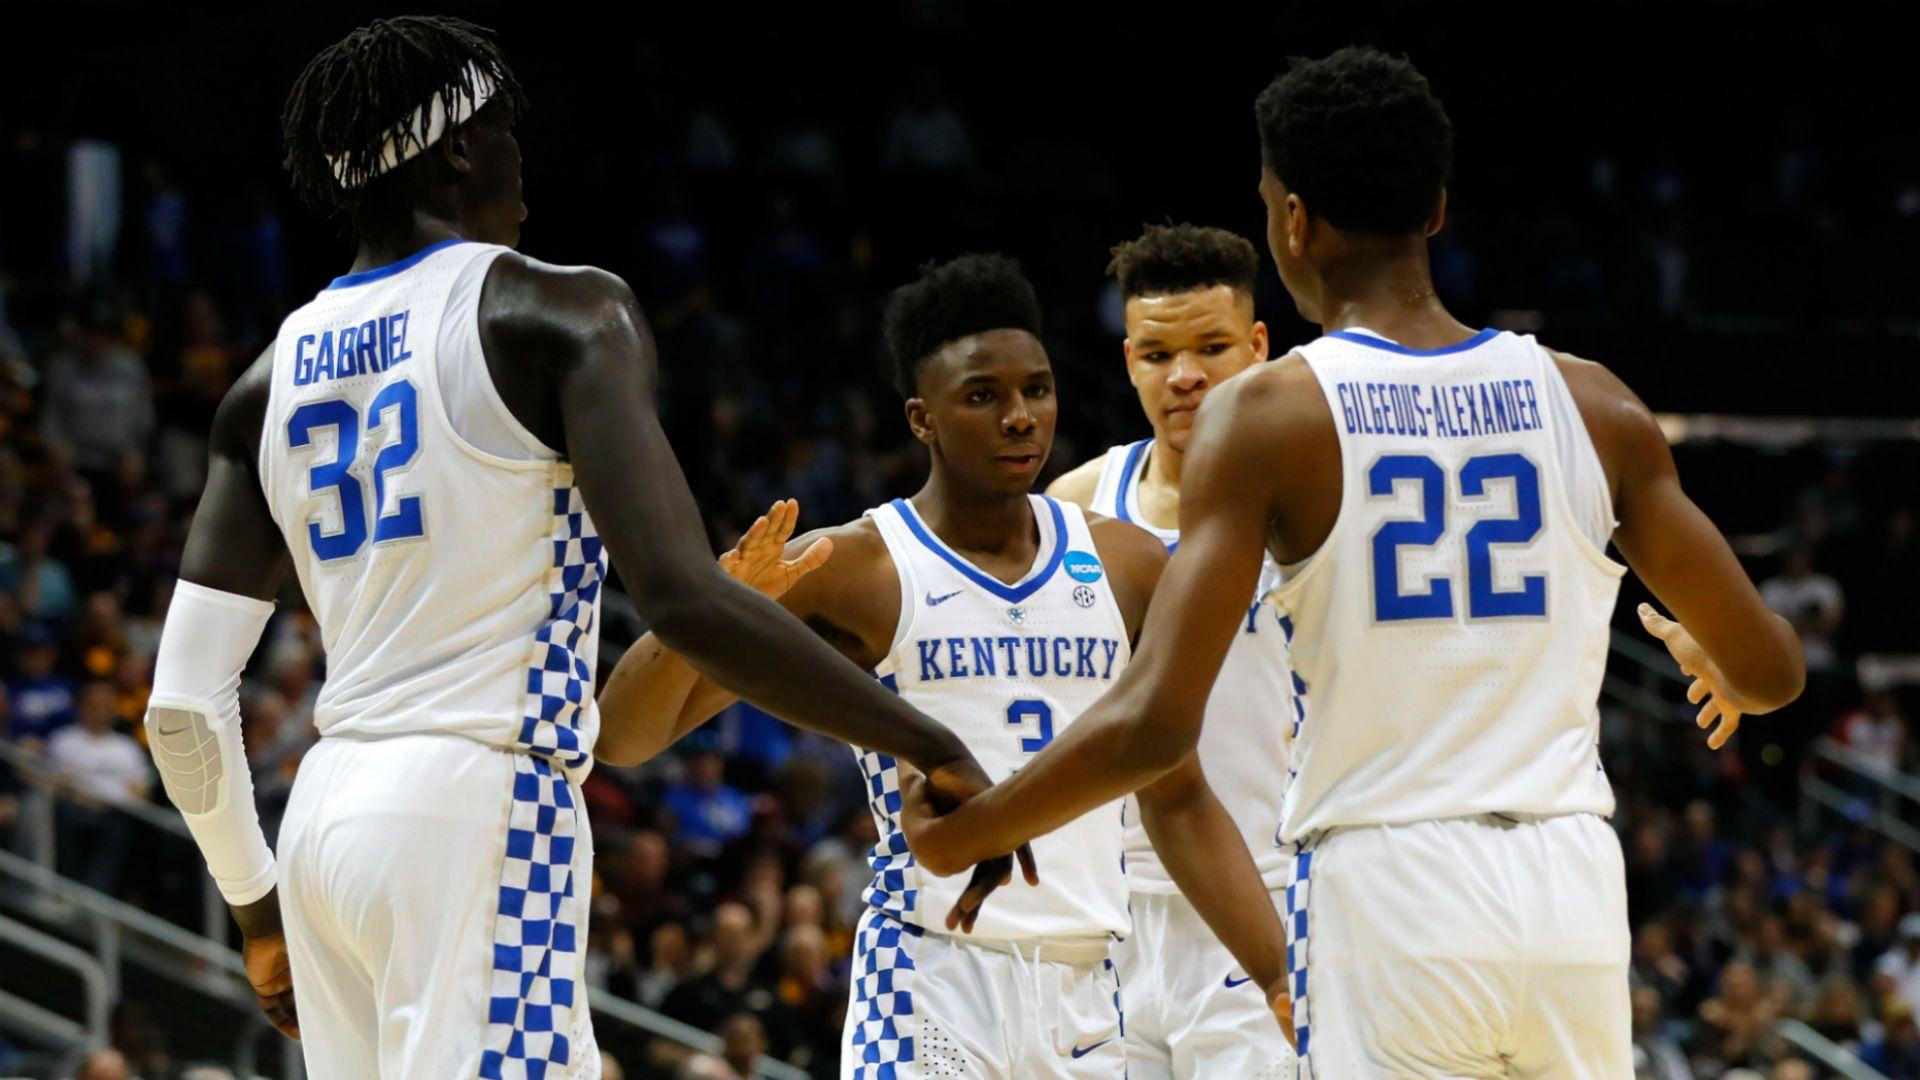 Kentucky opponents could be shaking next season if the right Cats